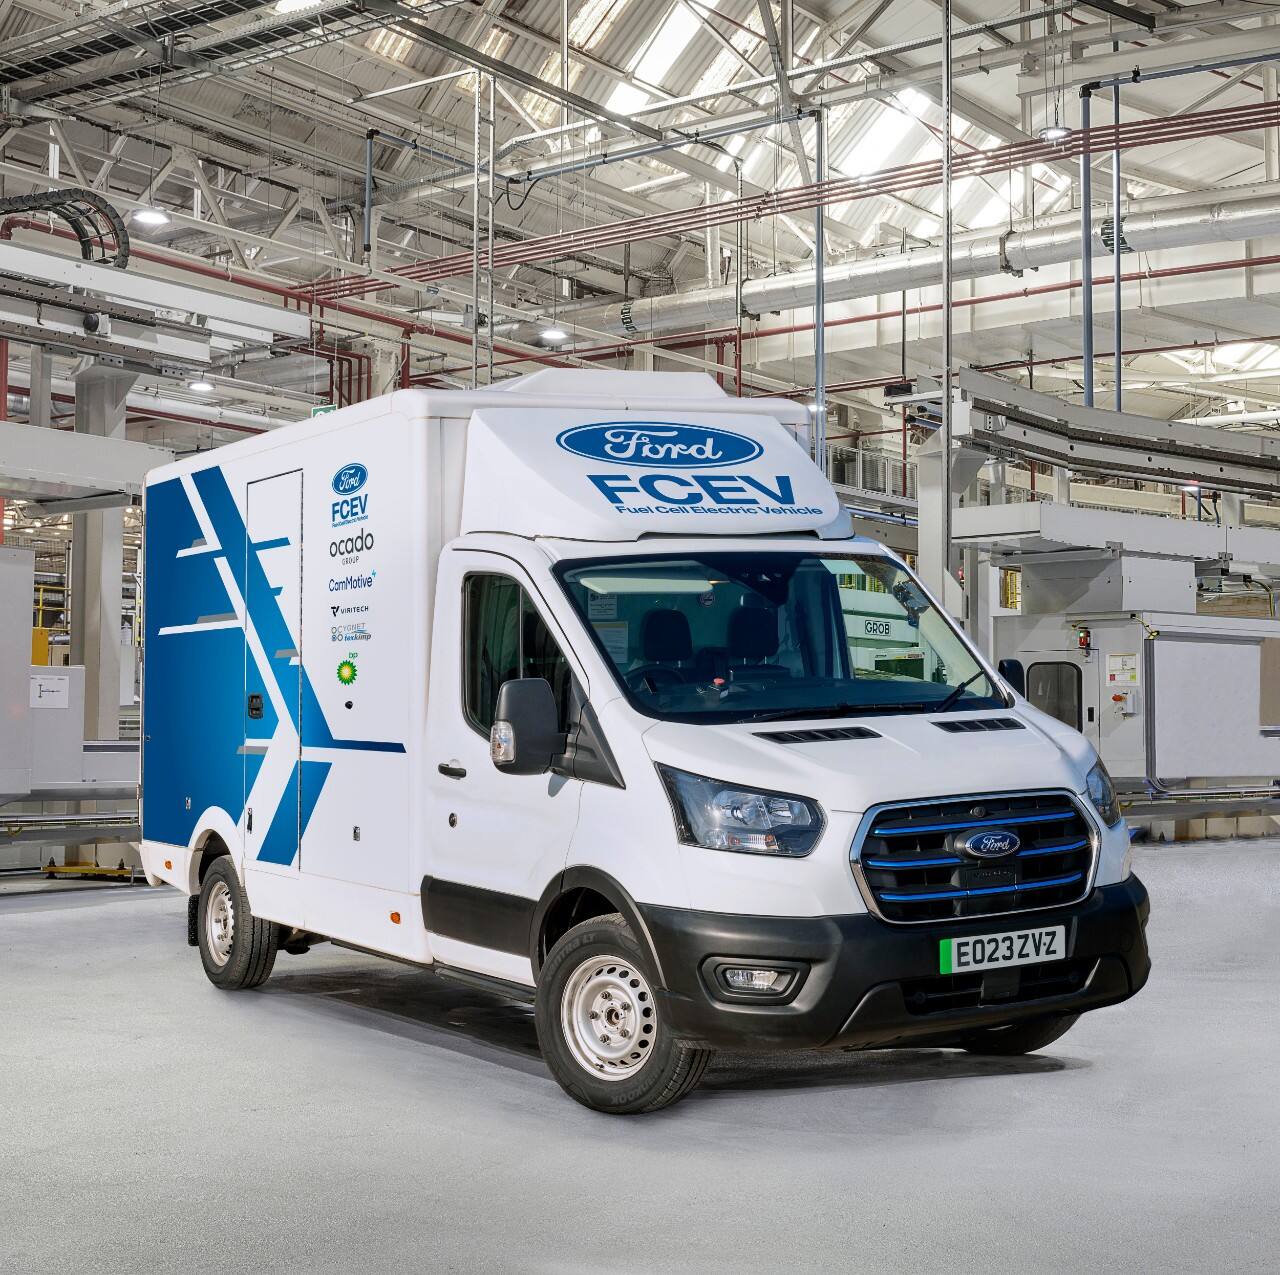 Ford Announces Three-Year Hydrogen Fuel Cell E-Transit Trial